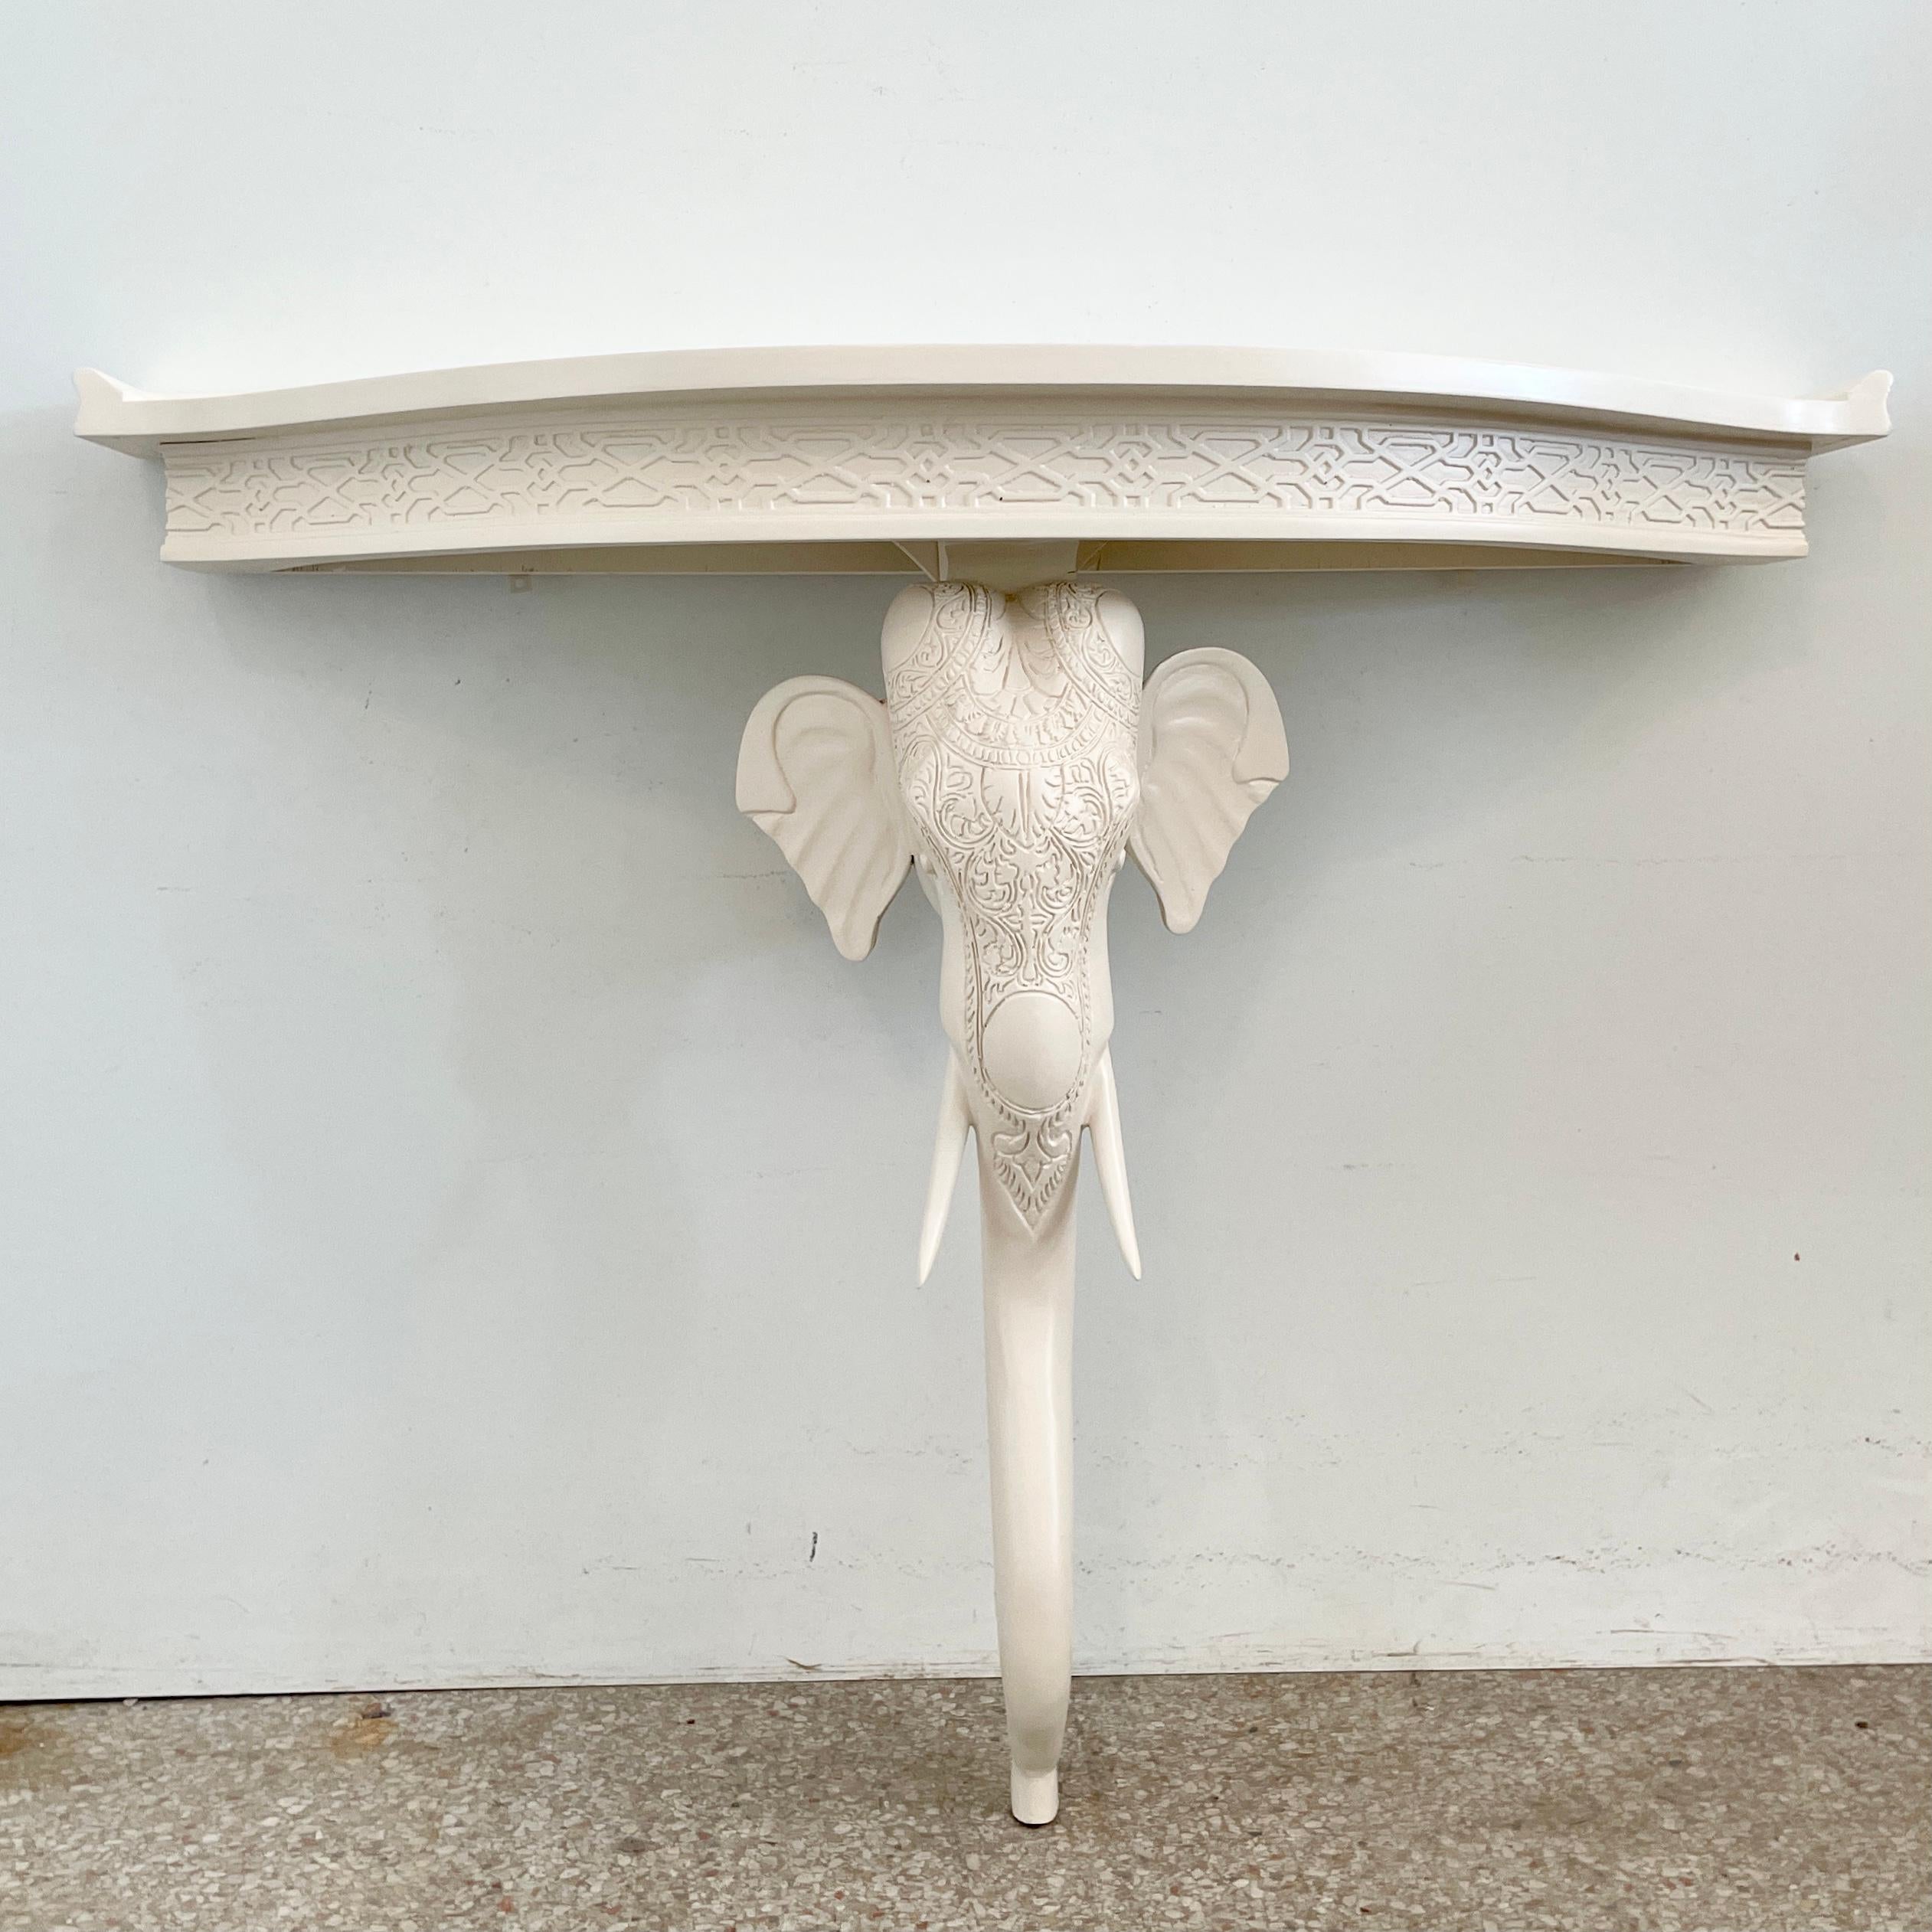 Beautiful wood carved elephant console by Gampel-Stoll freshly lacquered in ivory. Amazing carving details. Great addition to your Boho Chic inspired interiors.